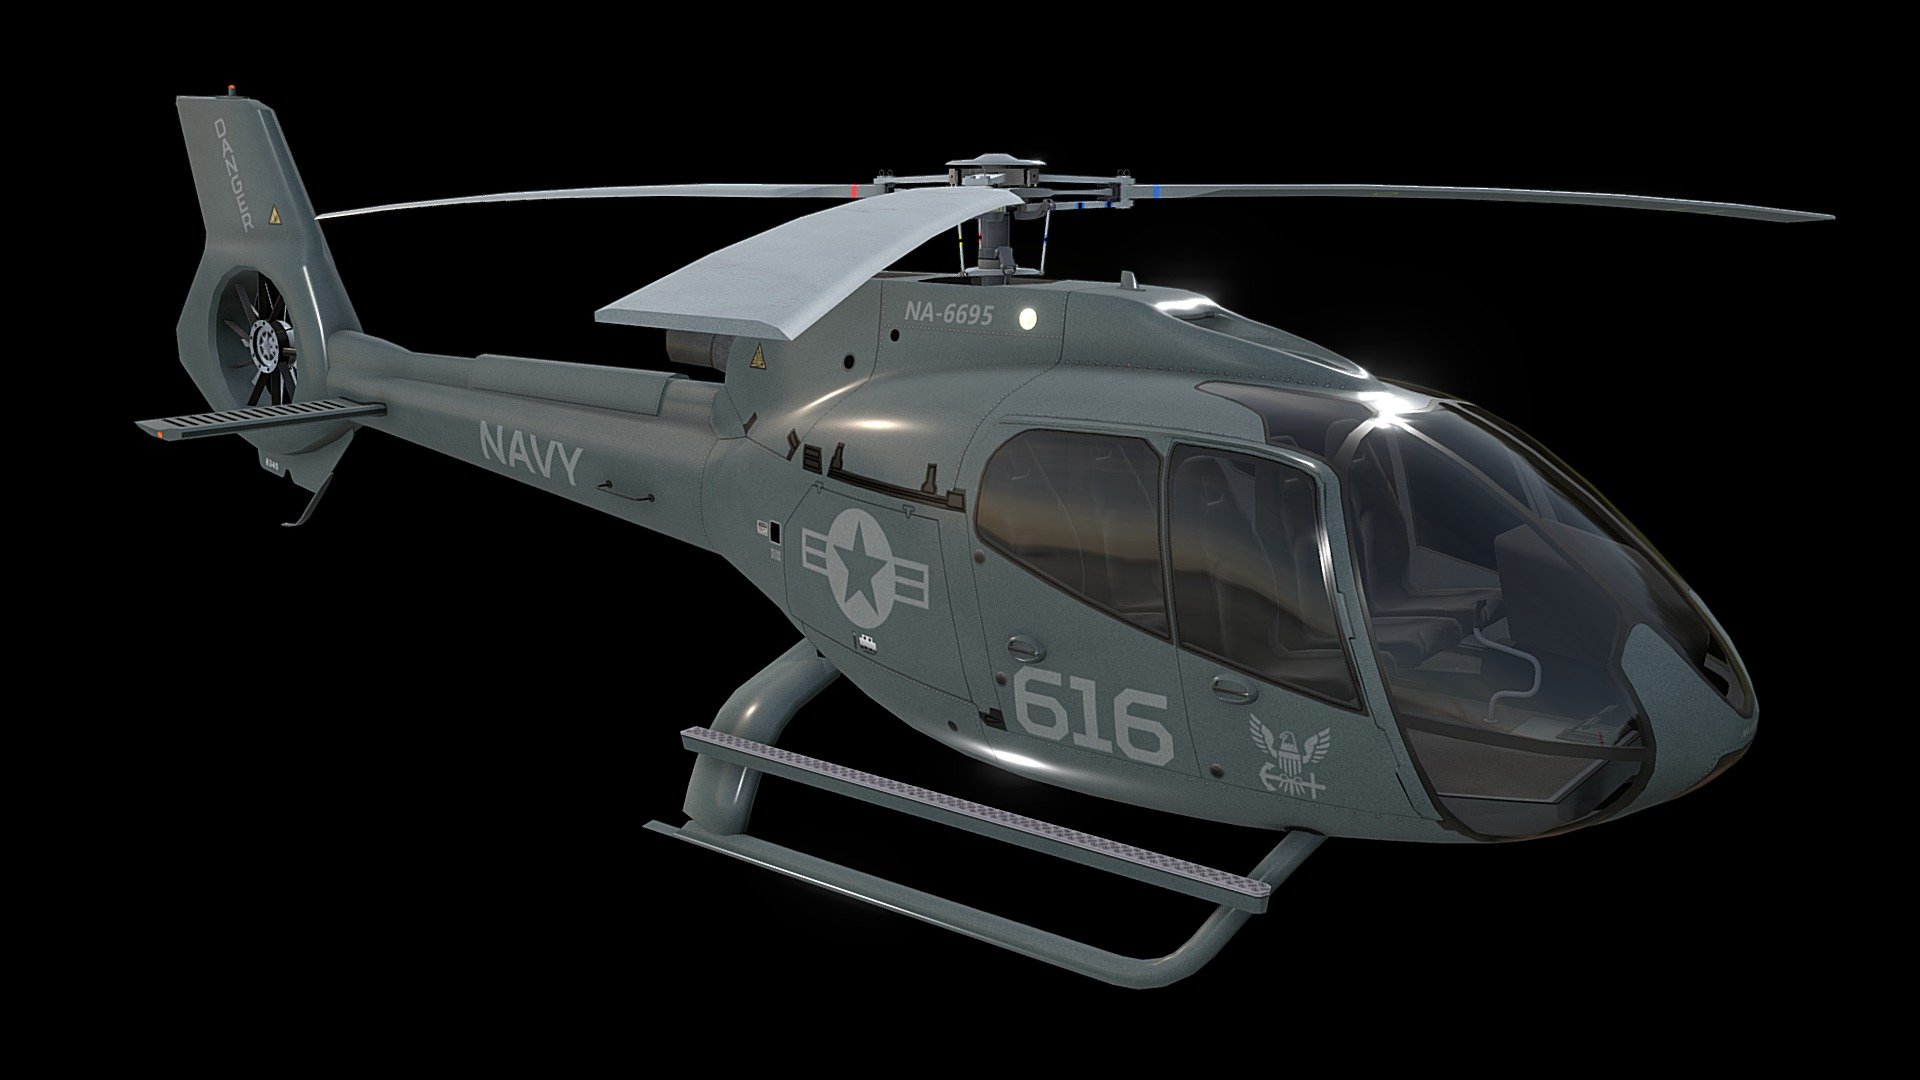 Low poly helicopter with 4 preconfigured level of detail

Made using blueprints in real world scale meters

LOD0 is the HQ version of the asset with bended top rotor and tiny parts

All other LOD are made unsolicited and voluntarily

LOD0 19710 tris, LOD1 10462 tris, LOD2 7388 tris, LOD3 5990 tris

All meshes are clean and 100% human controlled triangulated

Properly placed rotors pivots for flawless rotations

Simple capsule built interior that however fits perfectly the body

Non-overlapping unwrapped with best mapping for brandings

Both PBR workflows ready native 4K textures

Decreasing physical resolution to 2K results in a still decent looking heli

All liveries within the Airbus H130 series are interchangeable

For this purpose change just the 3 x albedo maps for body, rotors, interior

All LOD are exported seperately and together in each file format

Included are multiple file formats and native textures for download
 - US Navy Helicopter Airbus H130 Livery 31 - Buy Royalty Free 3D model by RealtimeModels 3d model